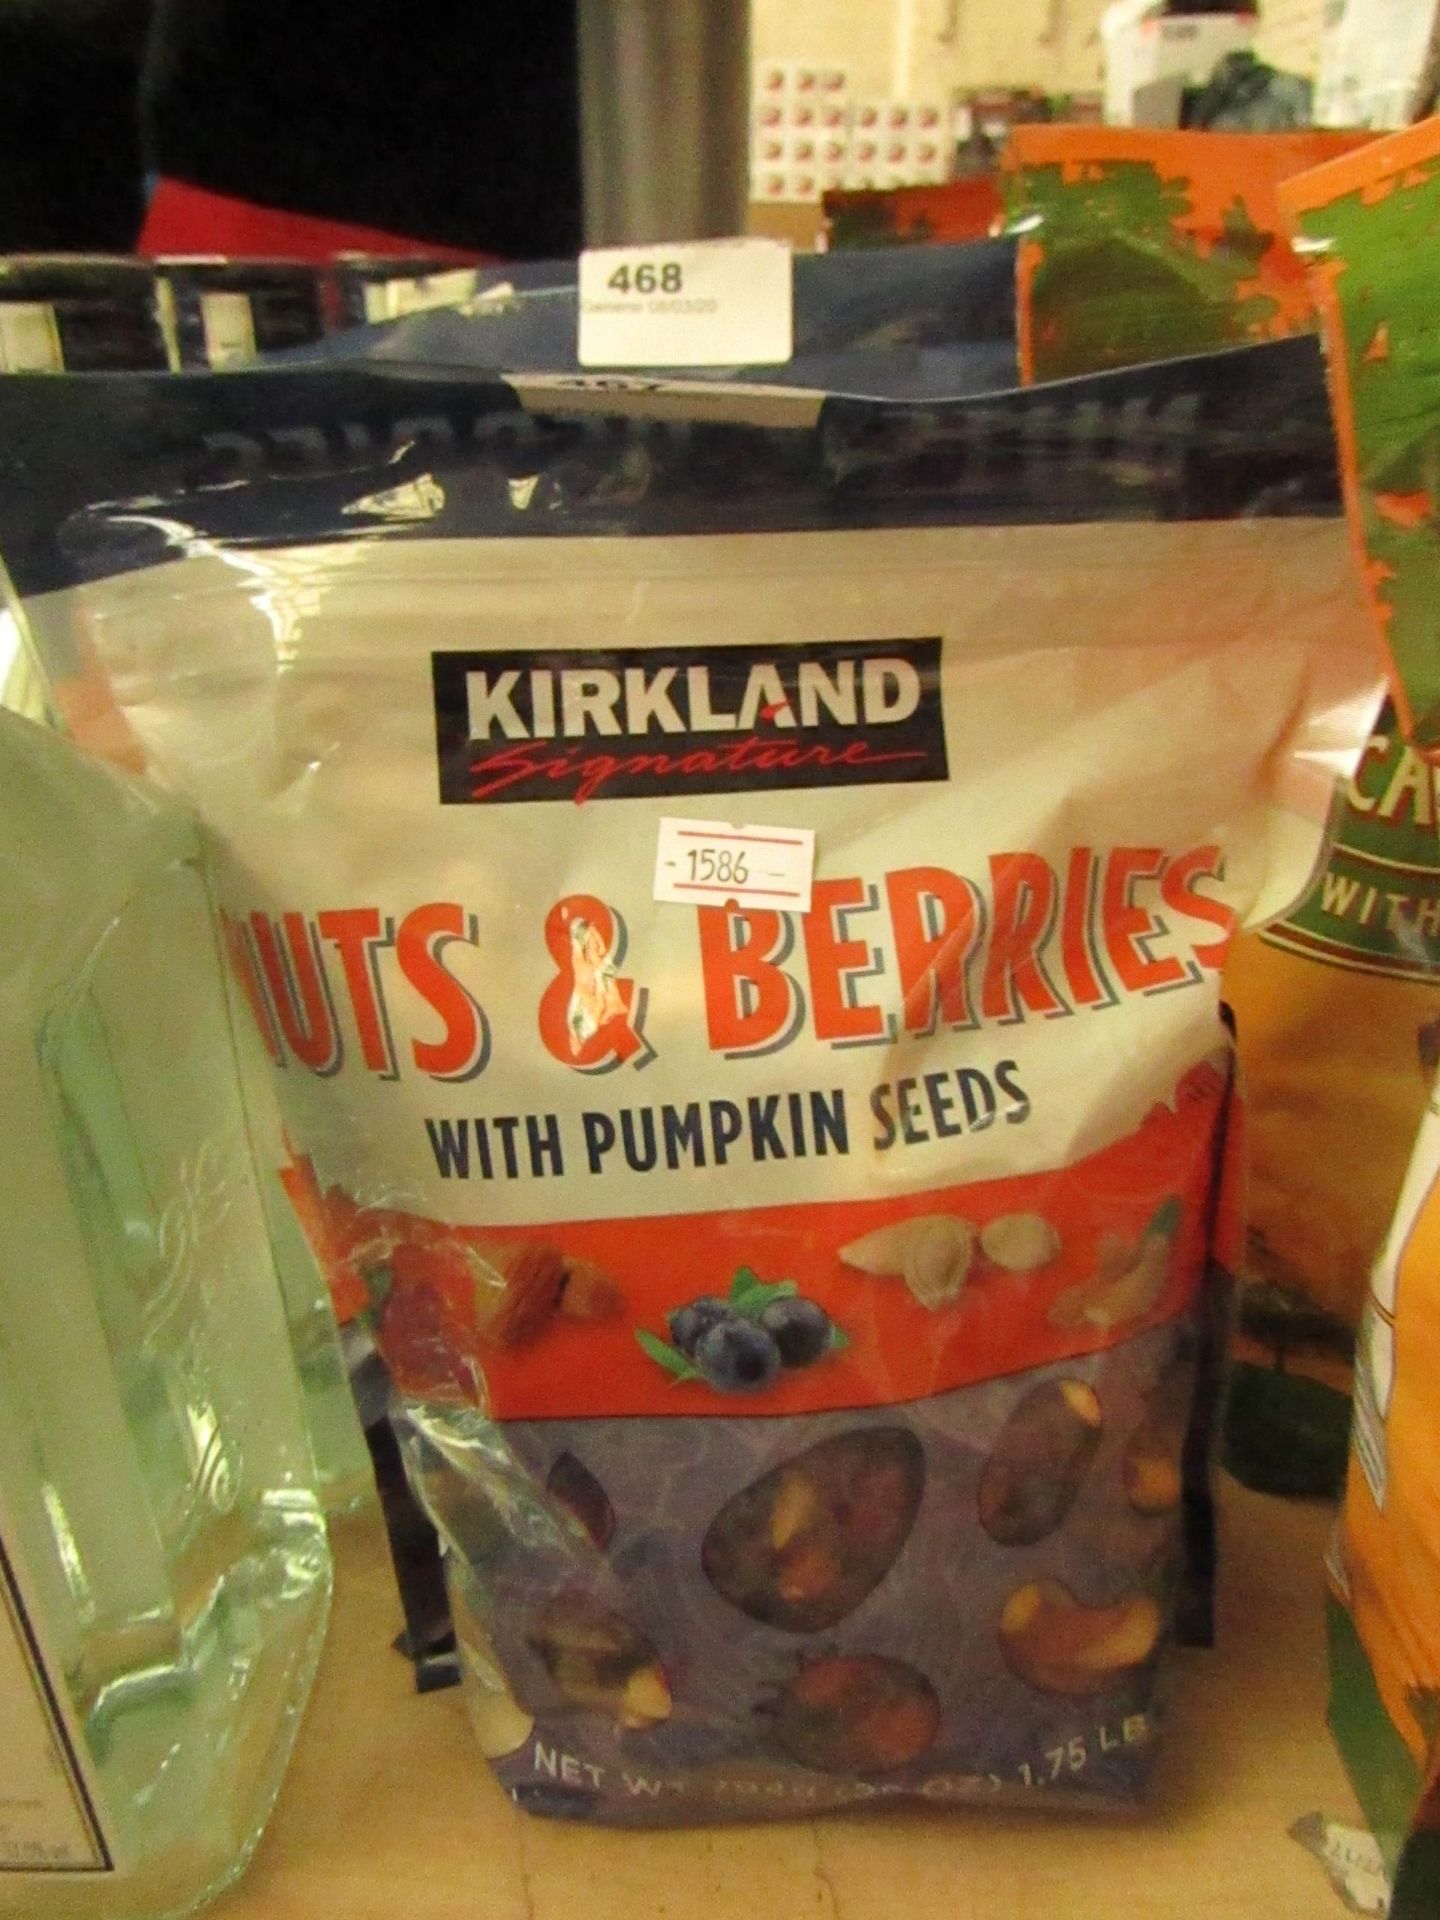 KirkLand - Nuts & Berries with Pumpin Seeds - BB 03/03/20.